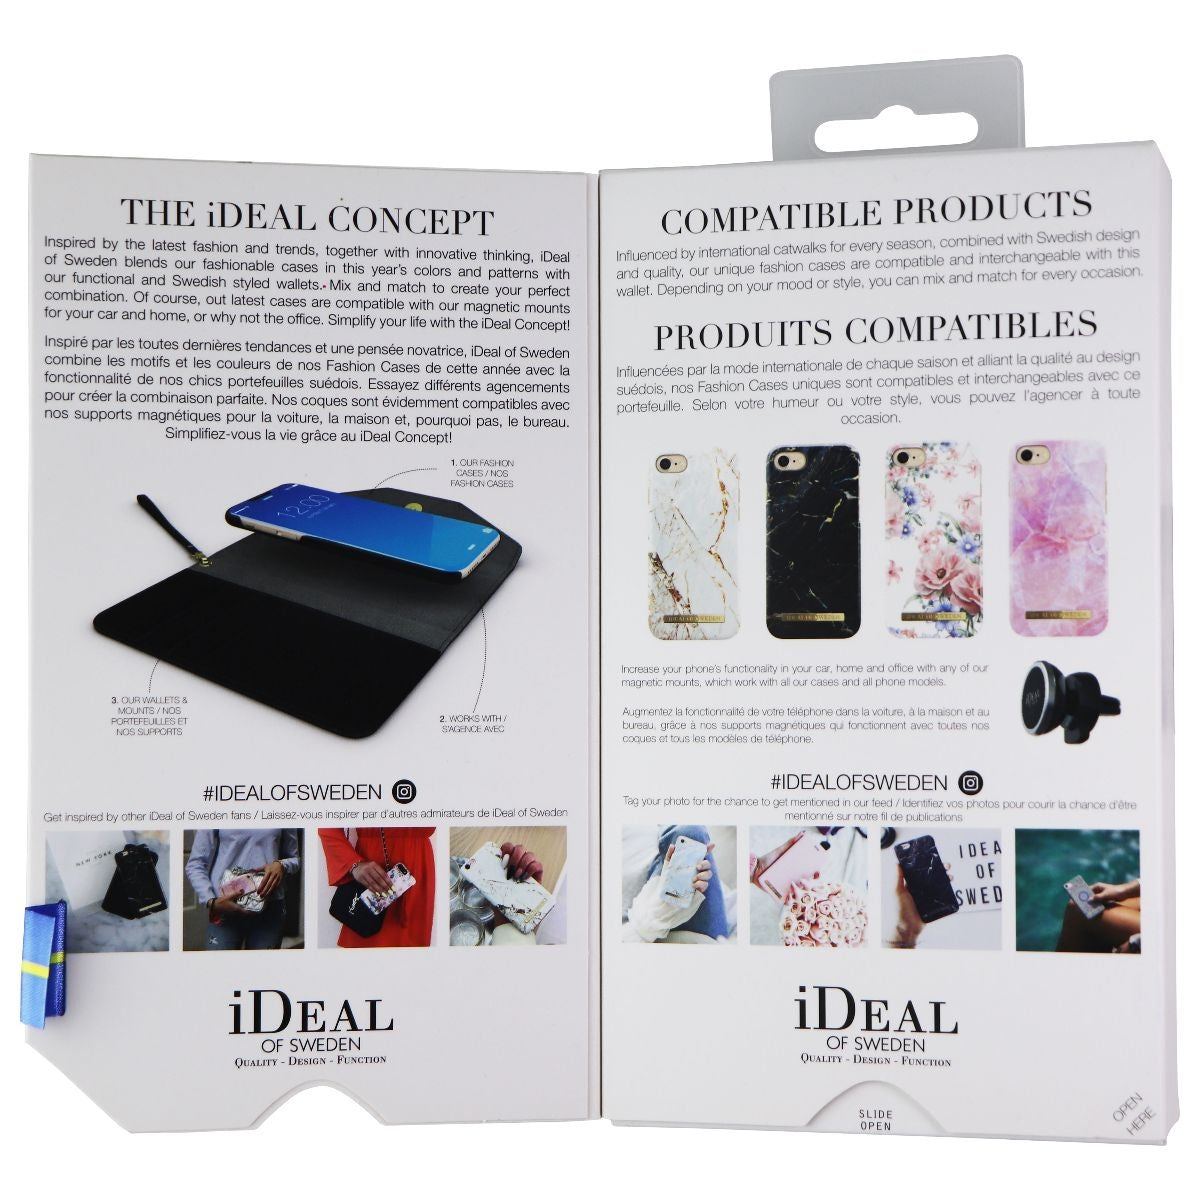 iDeal of Sweden Mayfair Clutch Wallet Case for Apple iPhone Xs/X - Black Cell Phone - Cases, Covers & Skins iDeal of Sweden    - Simple Cell Bulk Wholesale Pricing - USA Seller